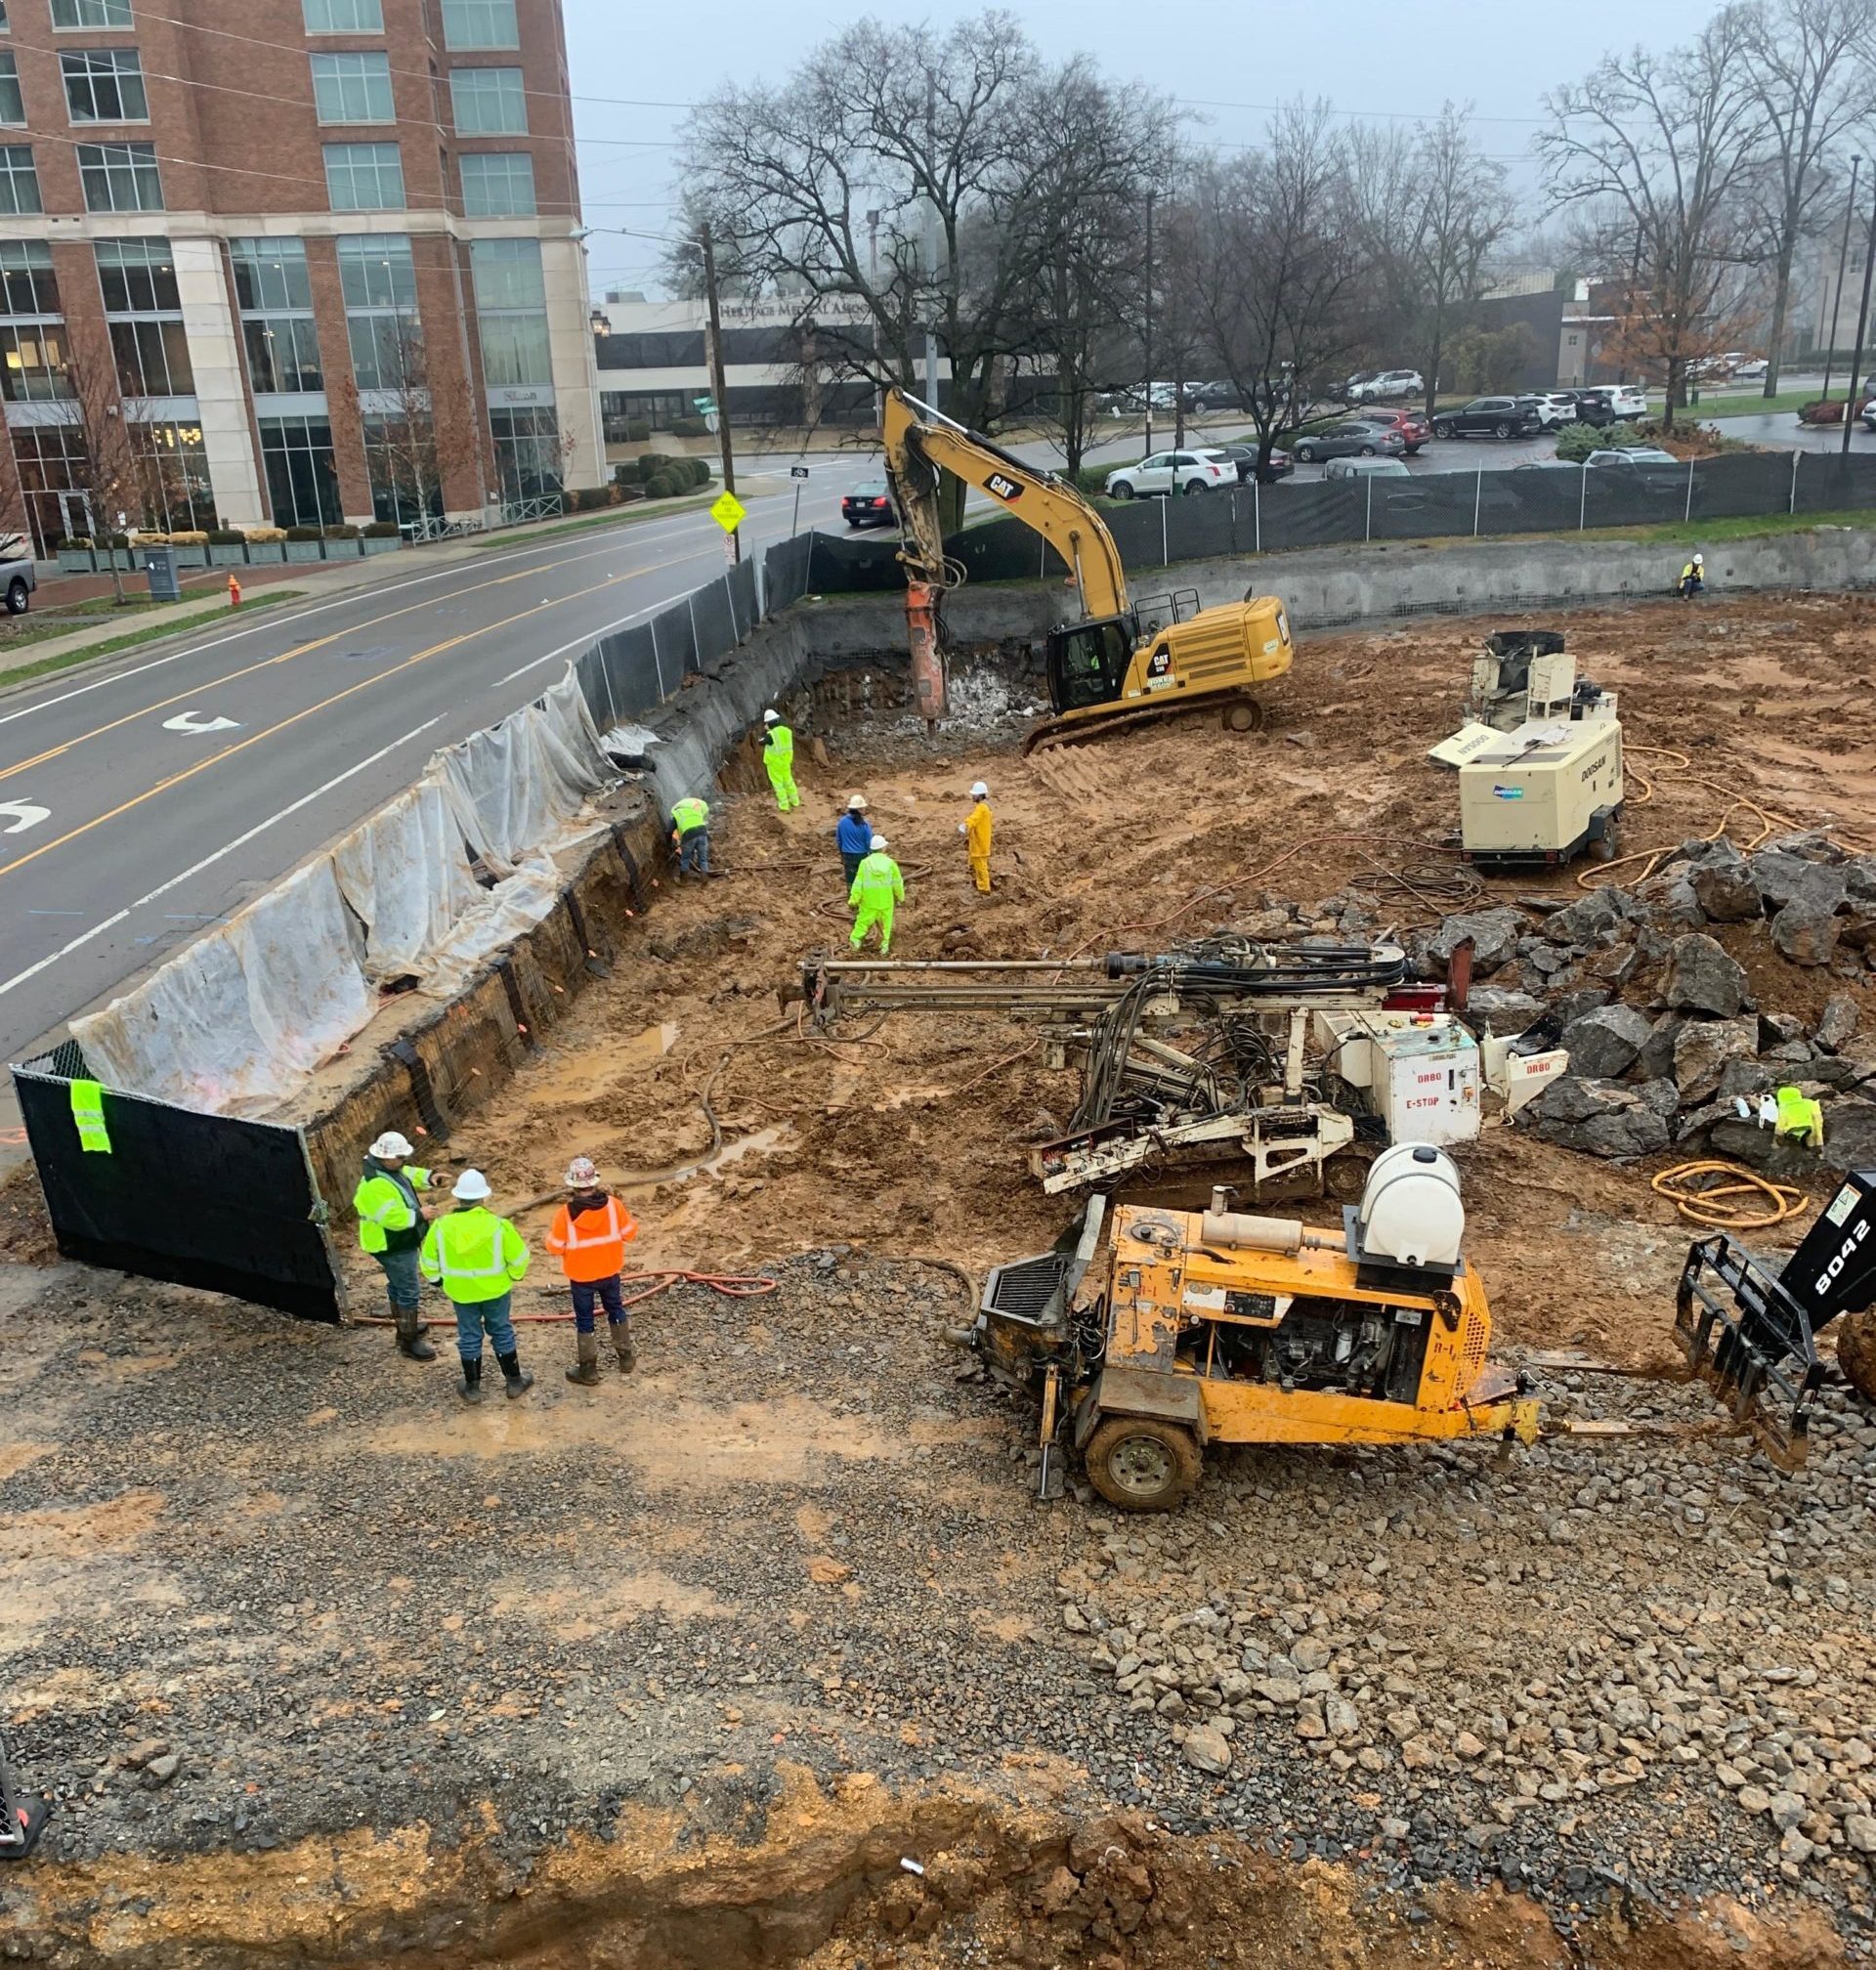 Construction workers busy doing dirt work at the Crestmoor site in Nashville